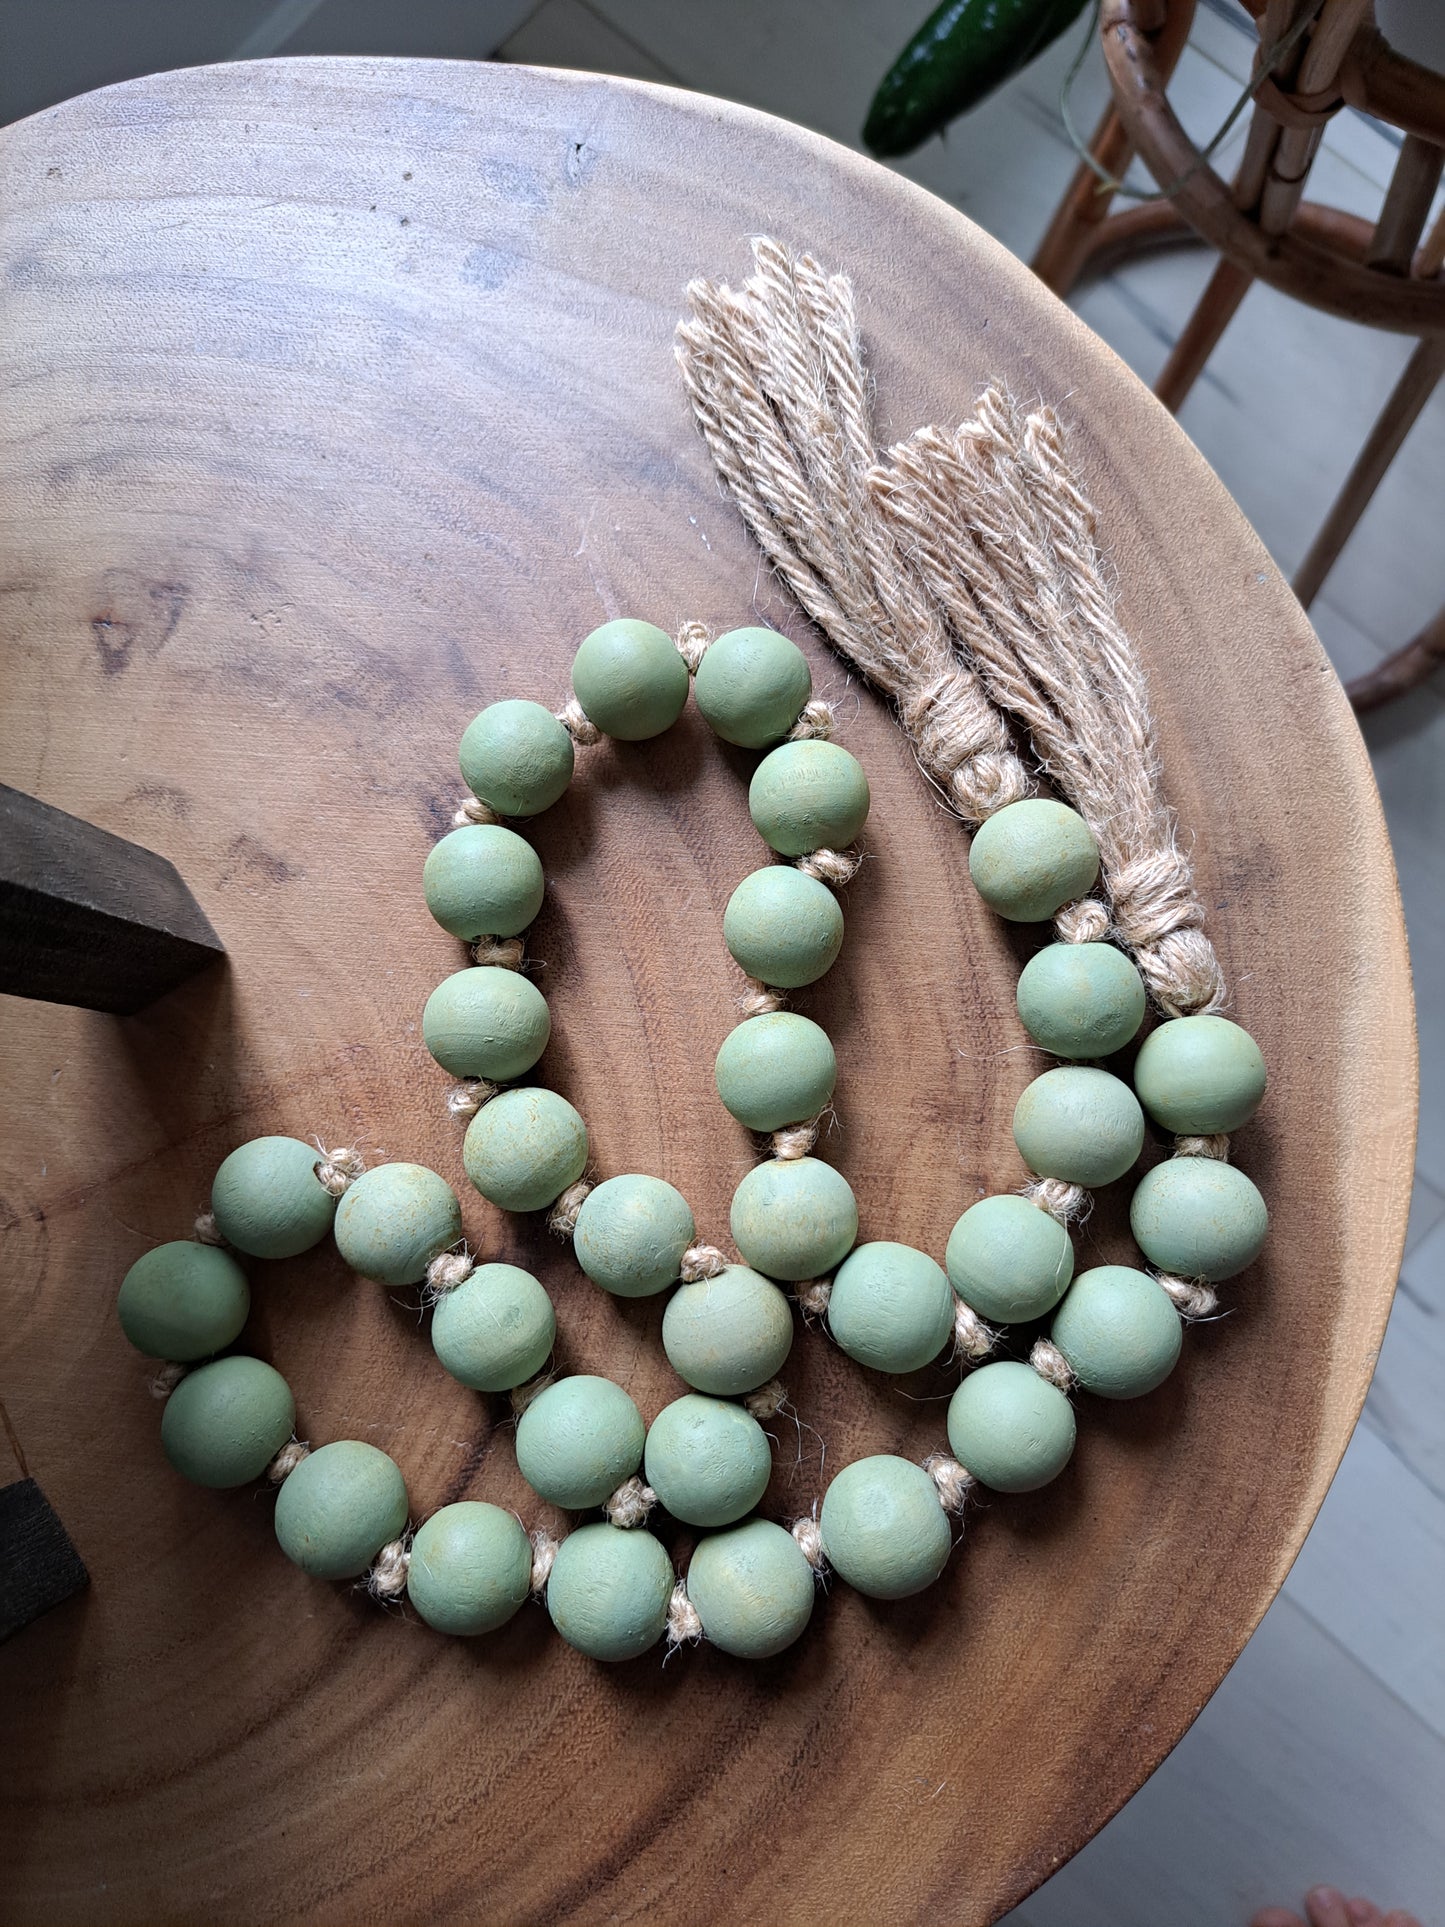 Weathered Landing's handmade sage green painted wooden bead garland with jute tassels. Made in Canada. Find garlands, plant hangers, pottery, art prints, and other home decor pieces at Weathered Landing. Located in Komoka with shipping to Canada and US.